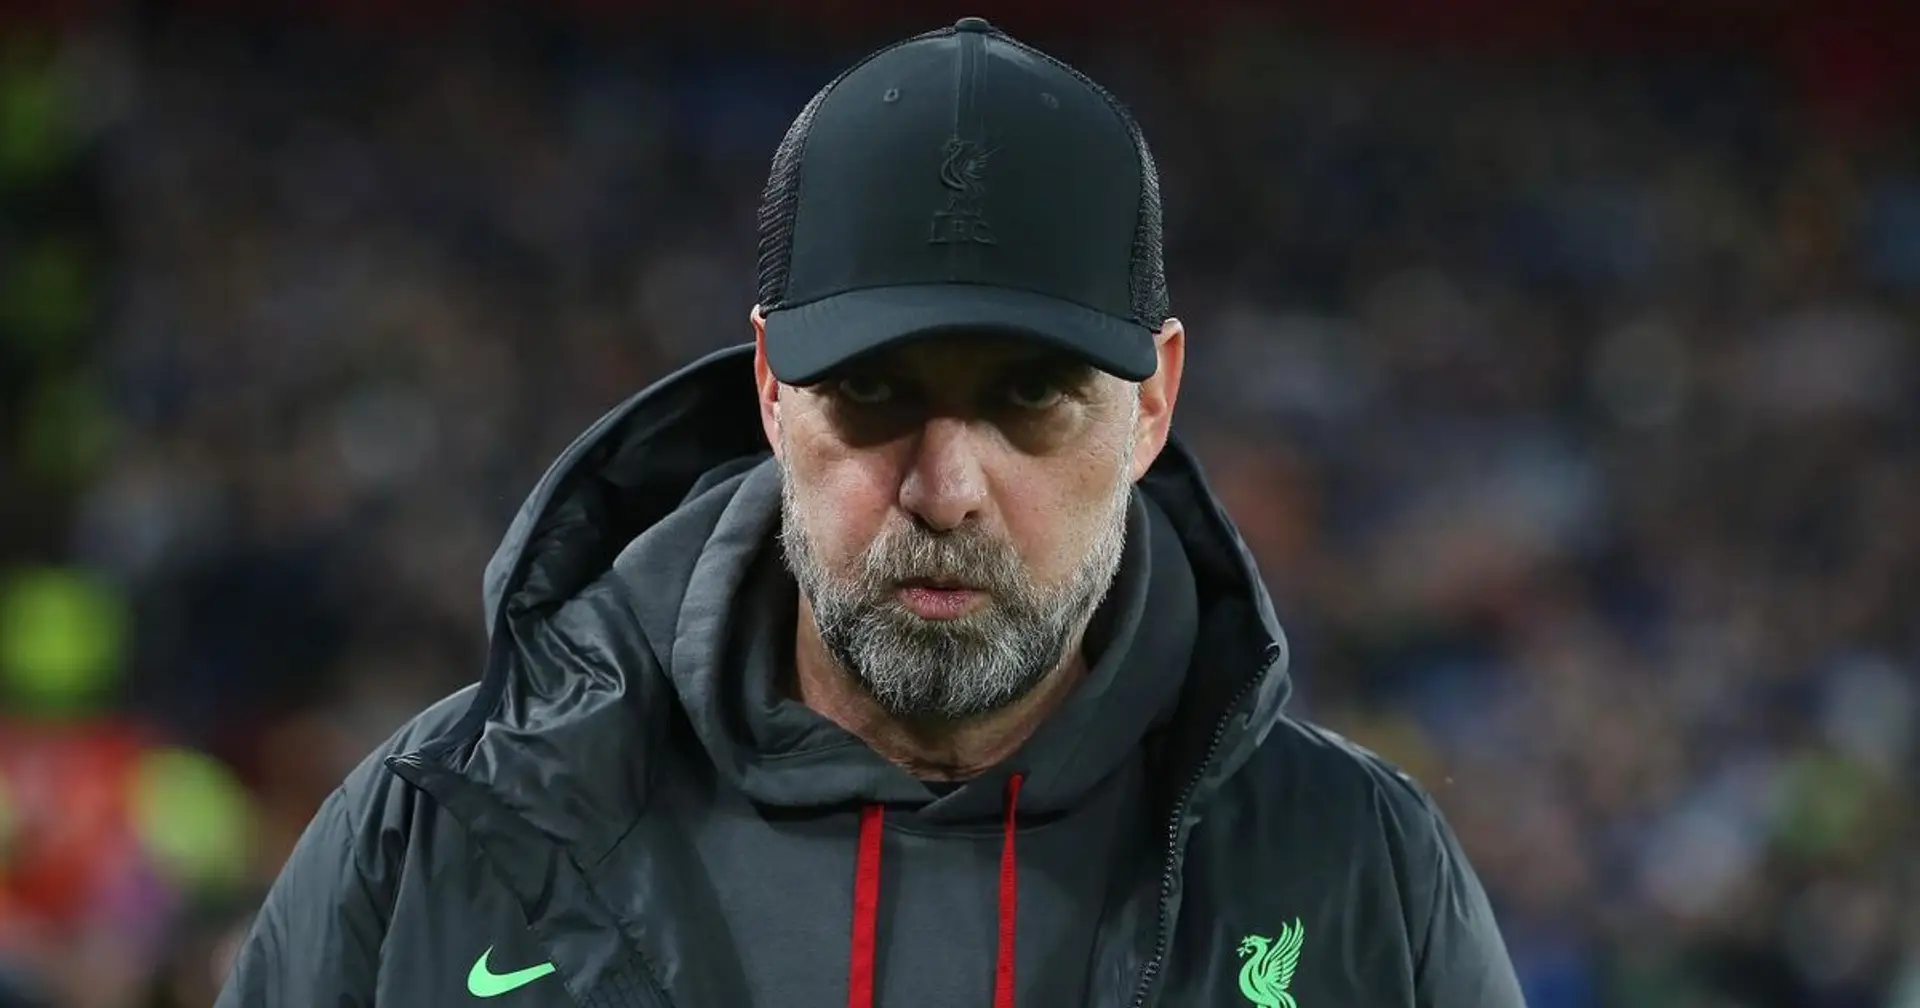 'We just lost the plot': Klopp reflects on shock Europa League defeat to Atalanta